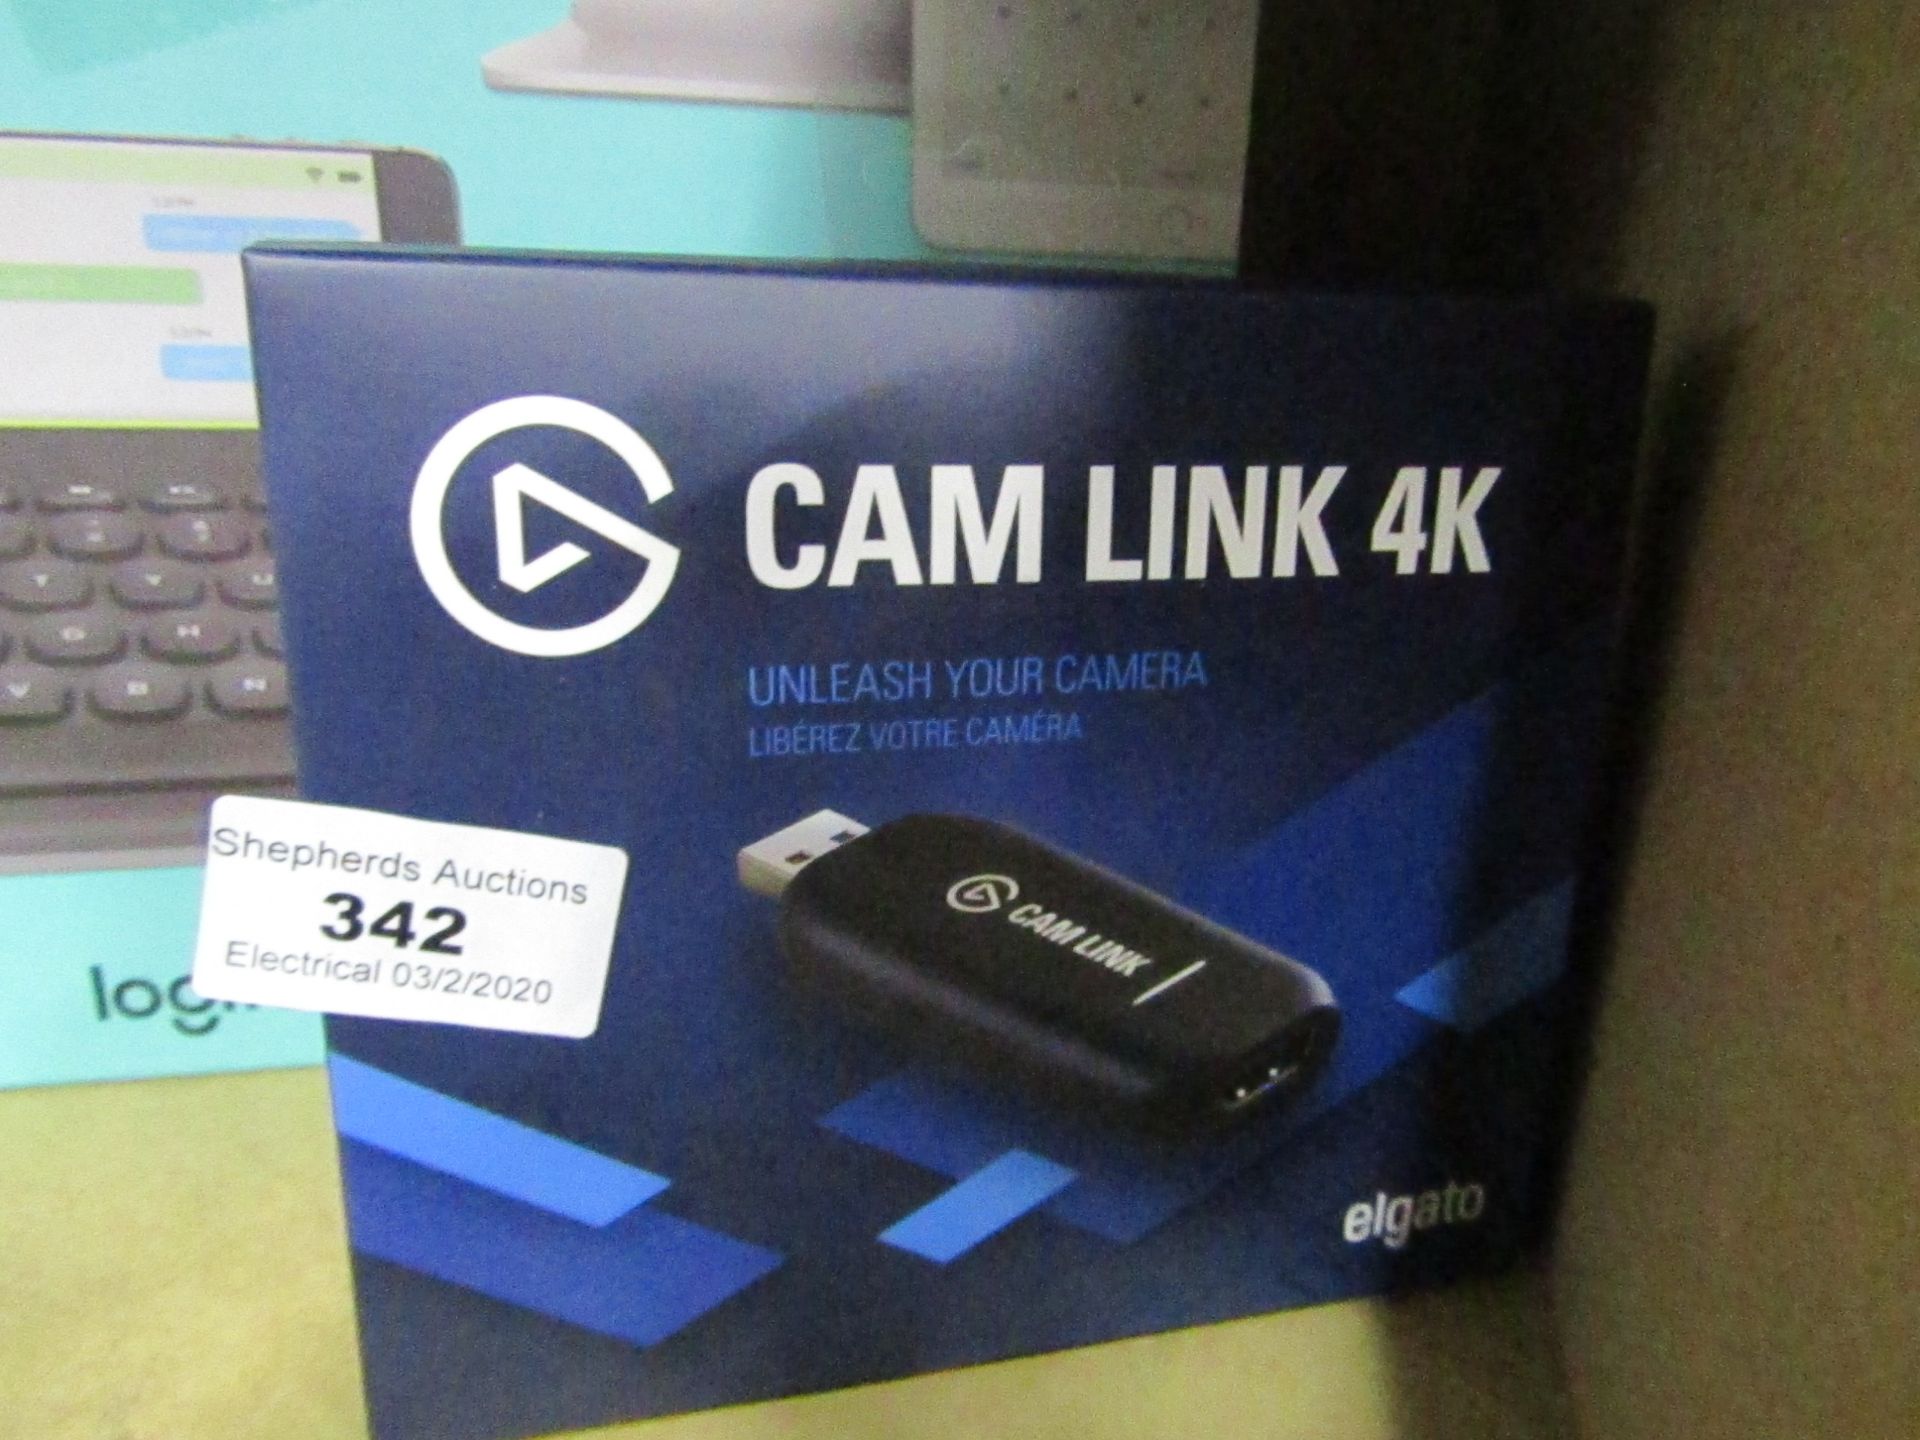 CAM LINK 4K - Elgato - Untested and boxed.